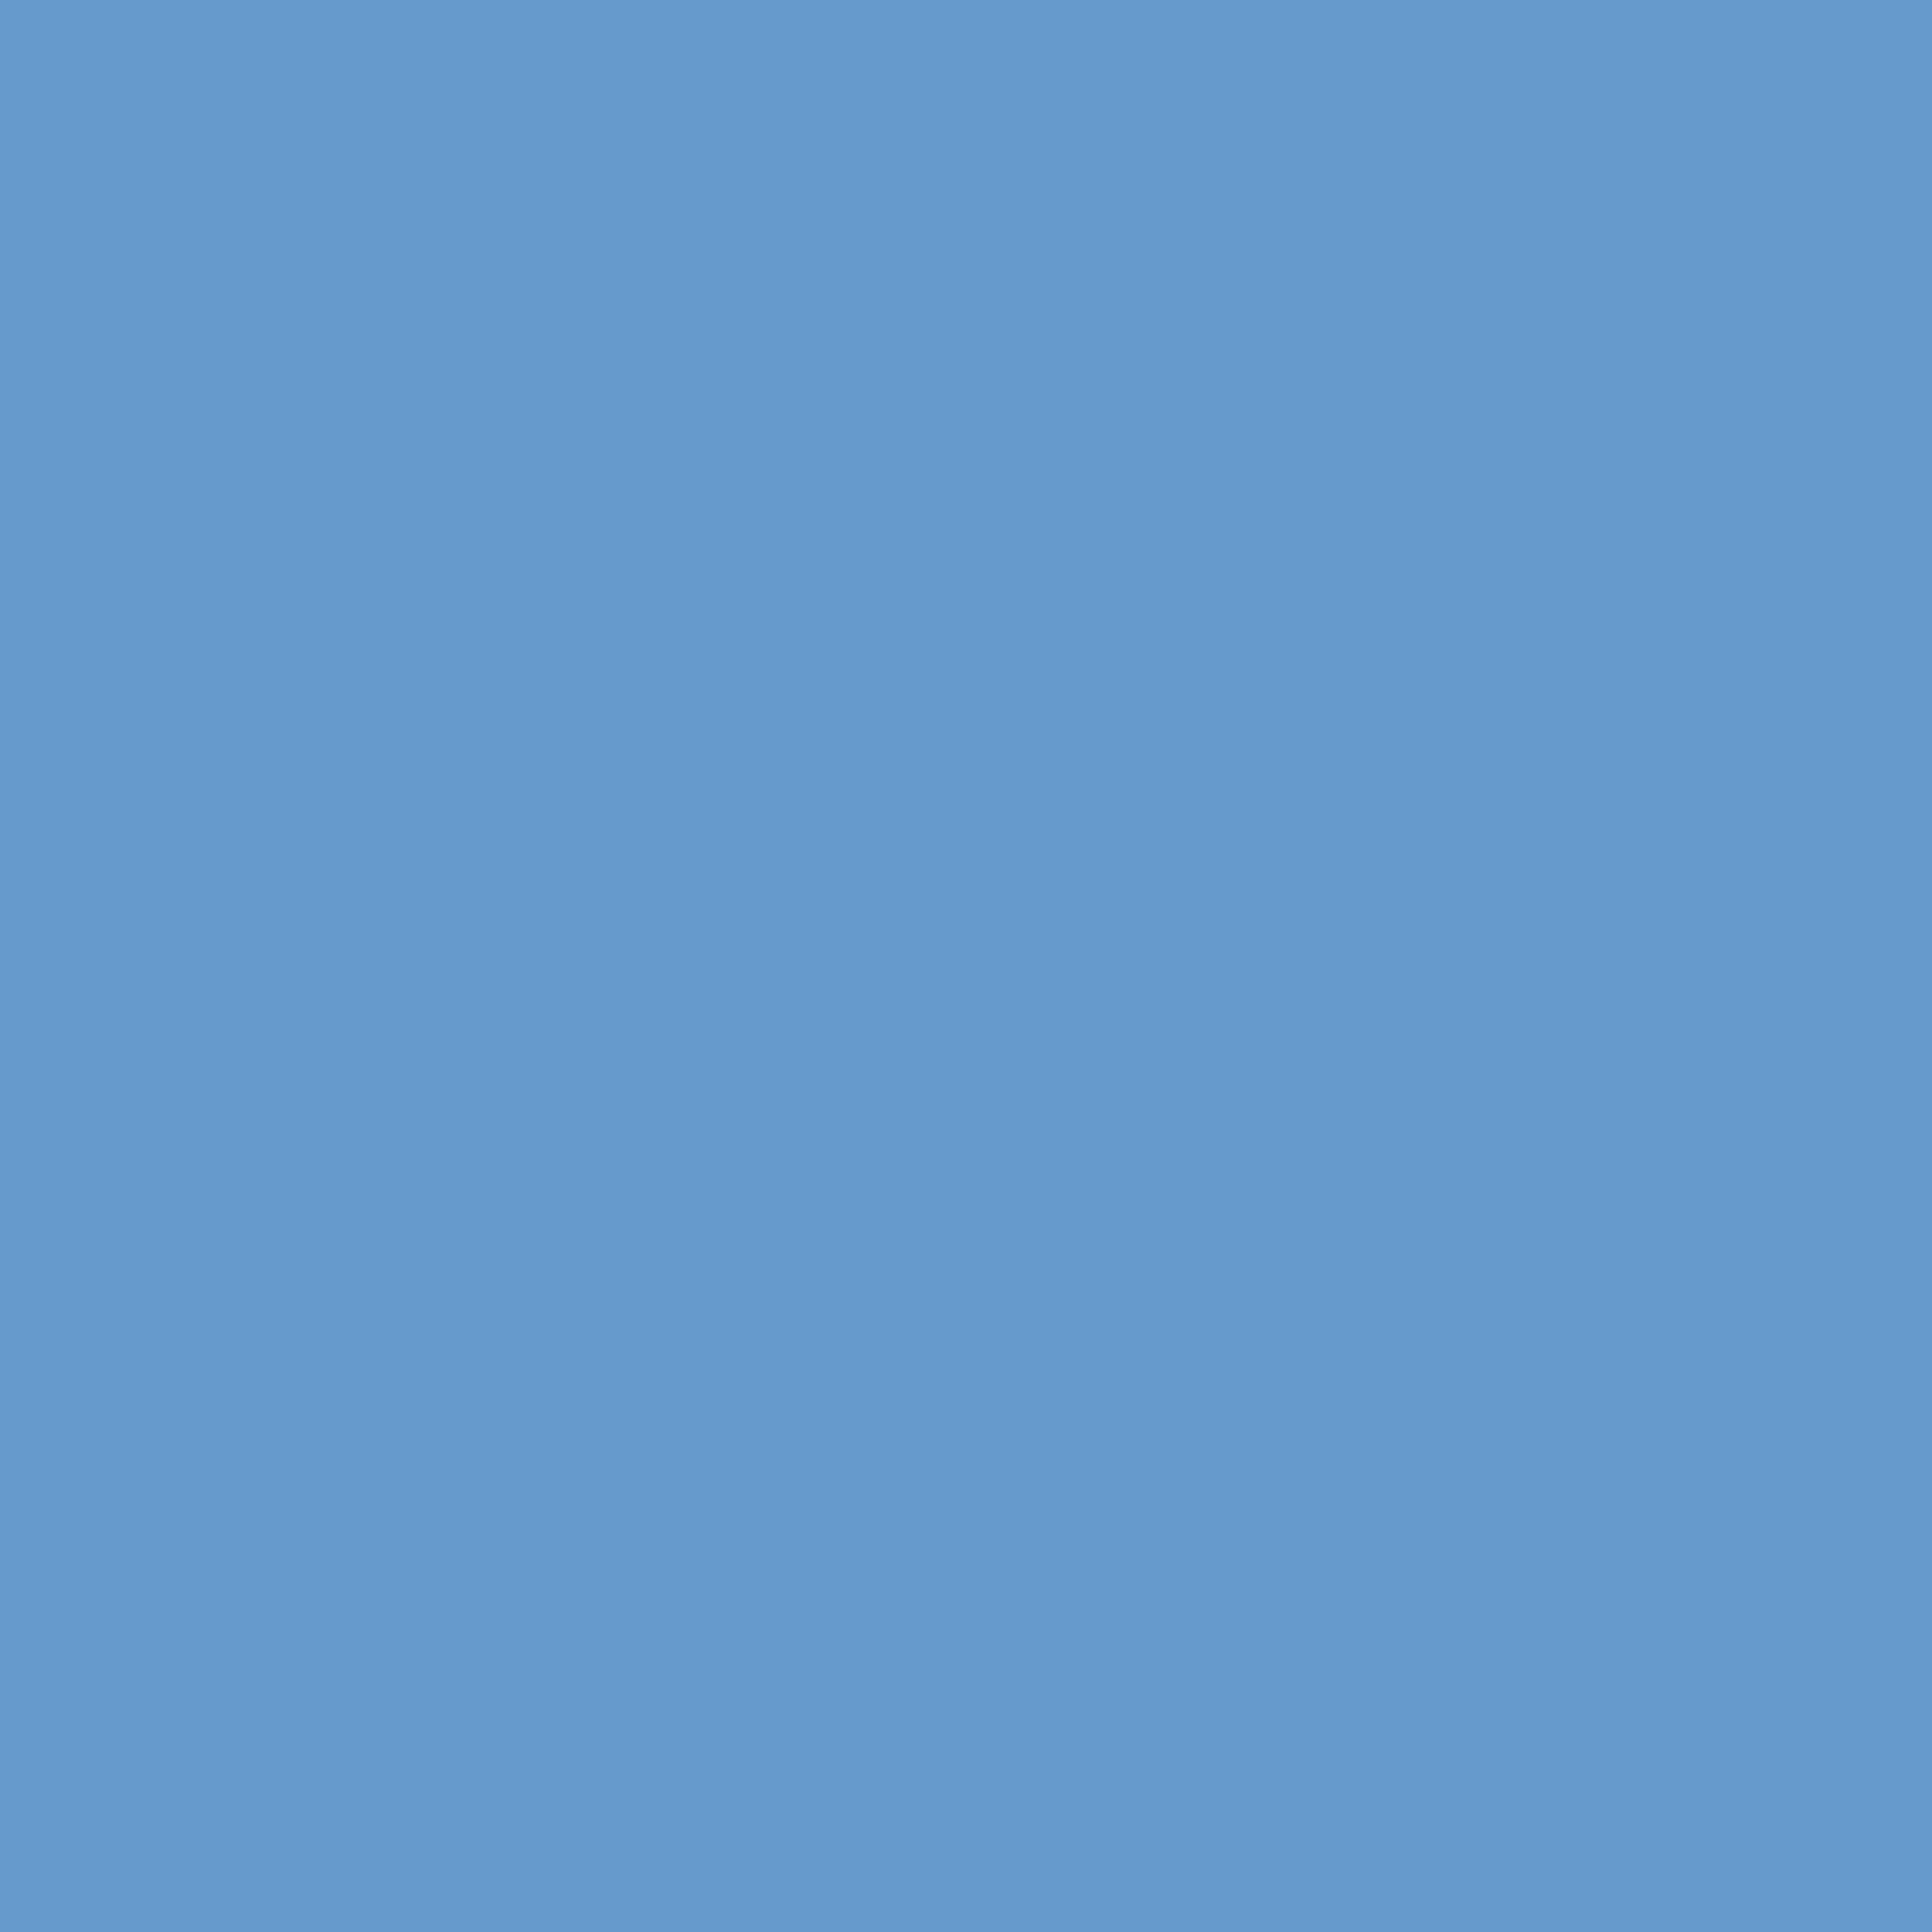 2732x2732 Blue-gray Solid Color Background